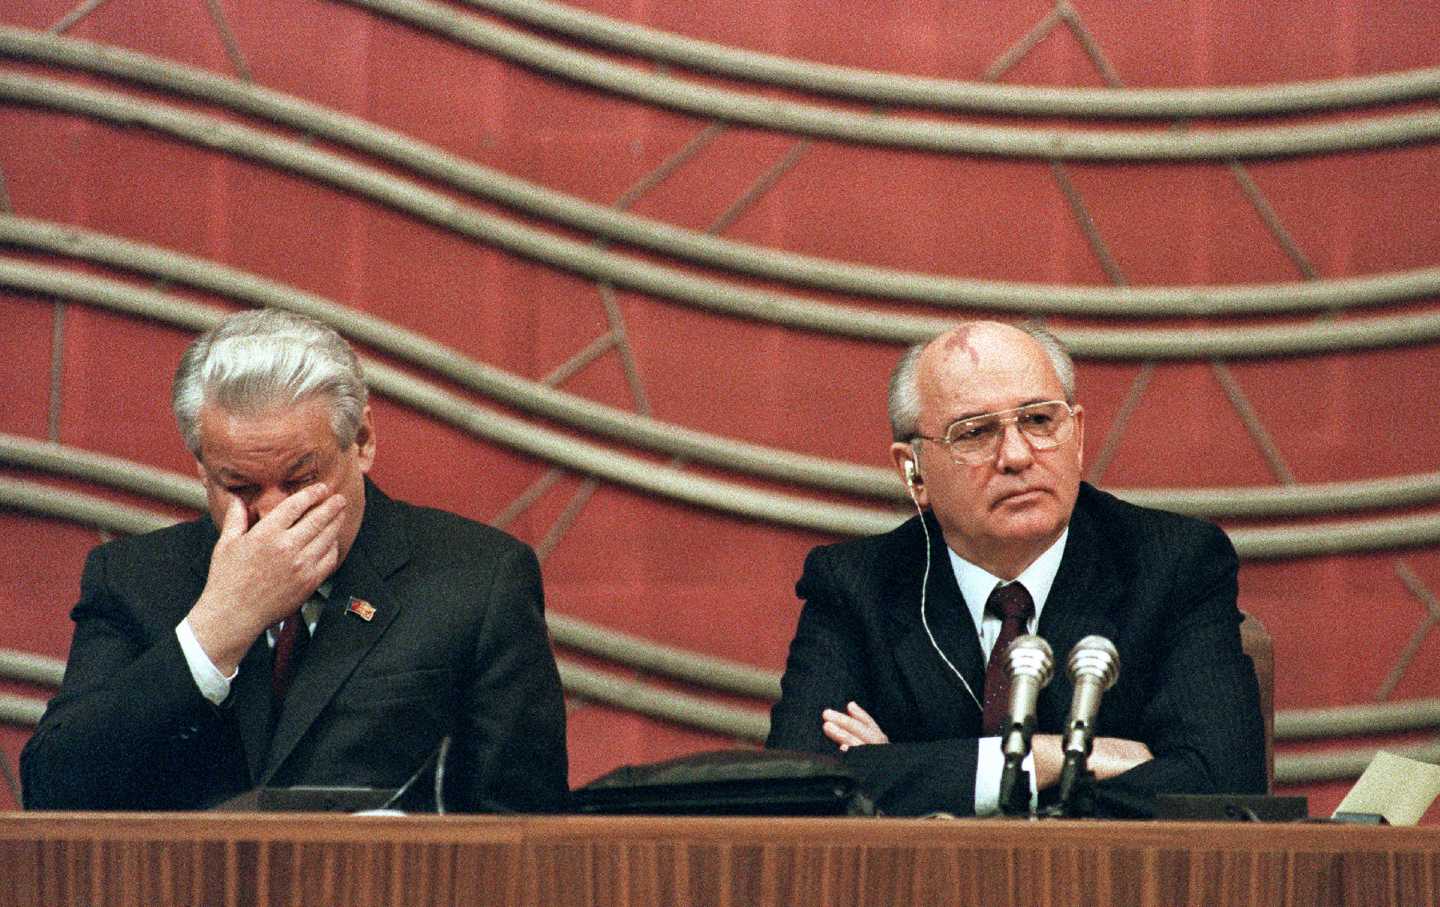 Russian Federation President Boris Yeltsin and Soviet President Mikhail Gorbachev at the opening of the Congress of People's Deputies of the USSR in Moscow on December 17, 1990.